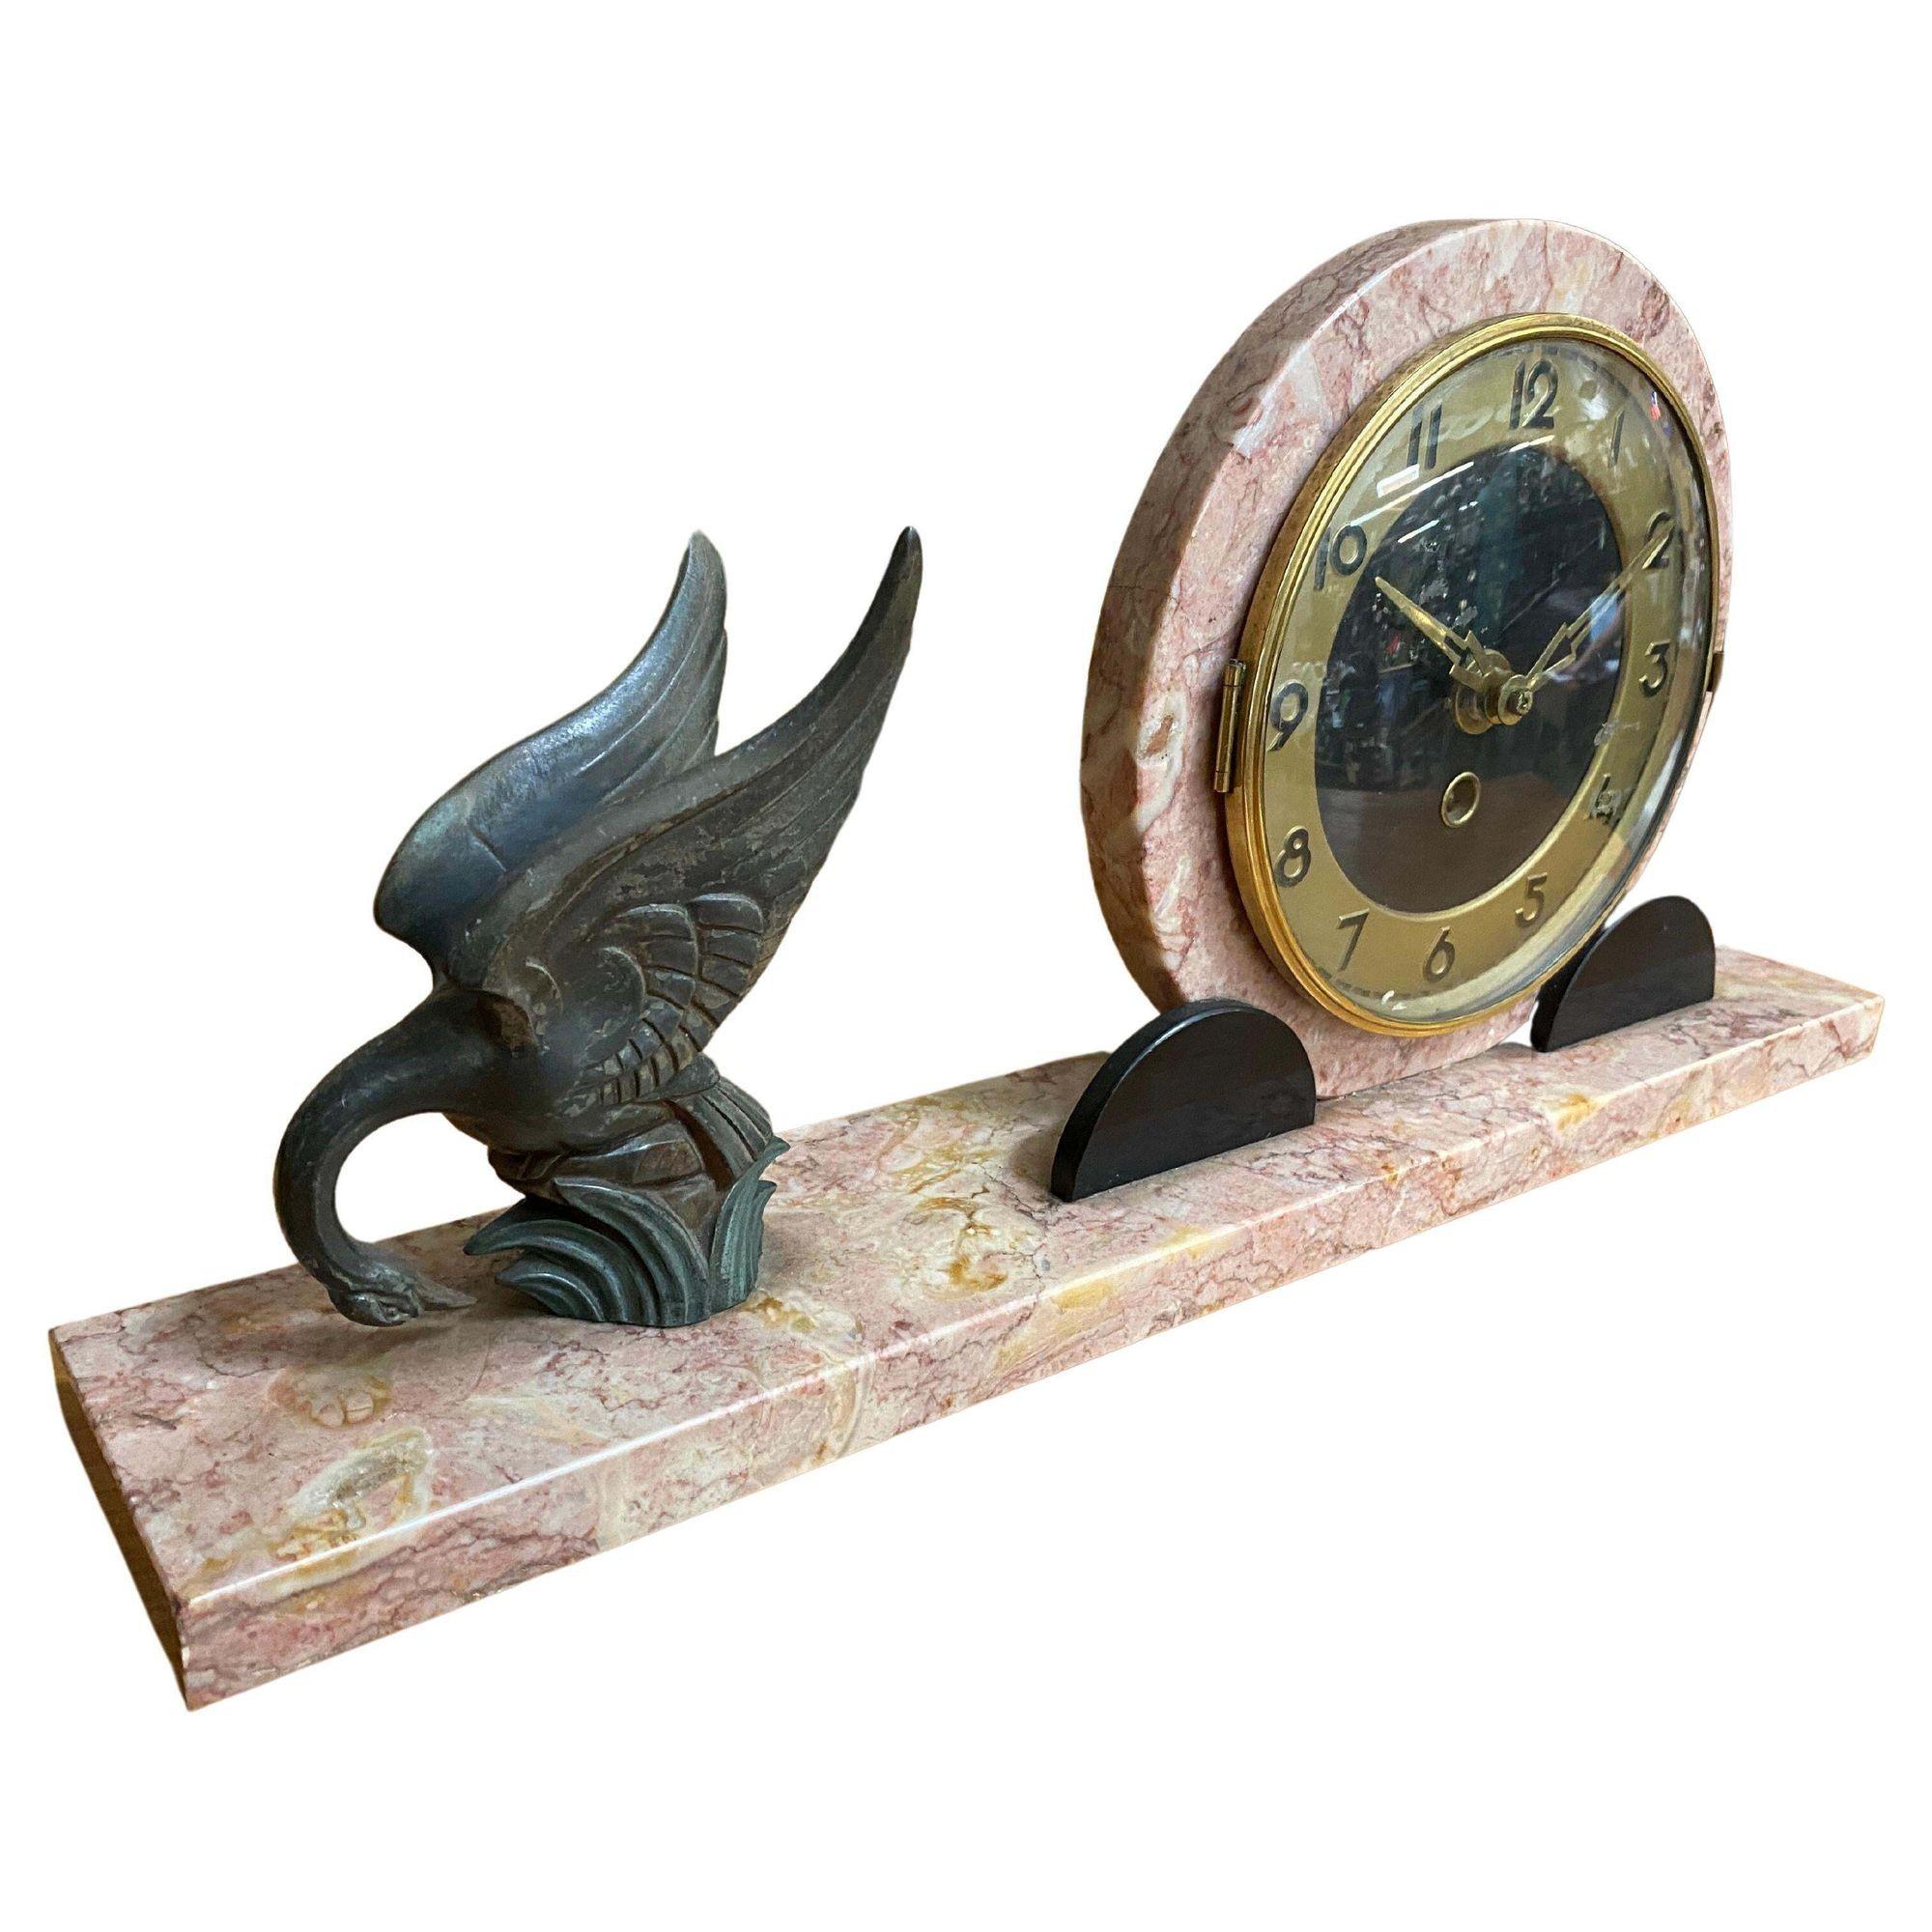 A Three Piece Marefbay Art Deco Marble and Bronze Clock Garniture, circa 1930
Marks: MAREFBAY
9 x 13-1/4 x 3 inches (22.9 x 33.7 x 7.6 cm) (clock)

The circular Arabic numeral clock on a rectangular marble base with bronze sparrows on a tree